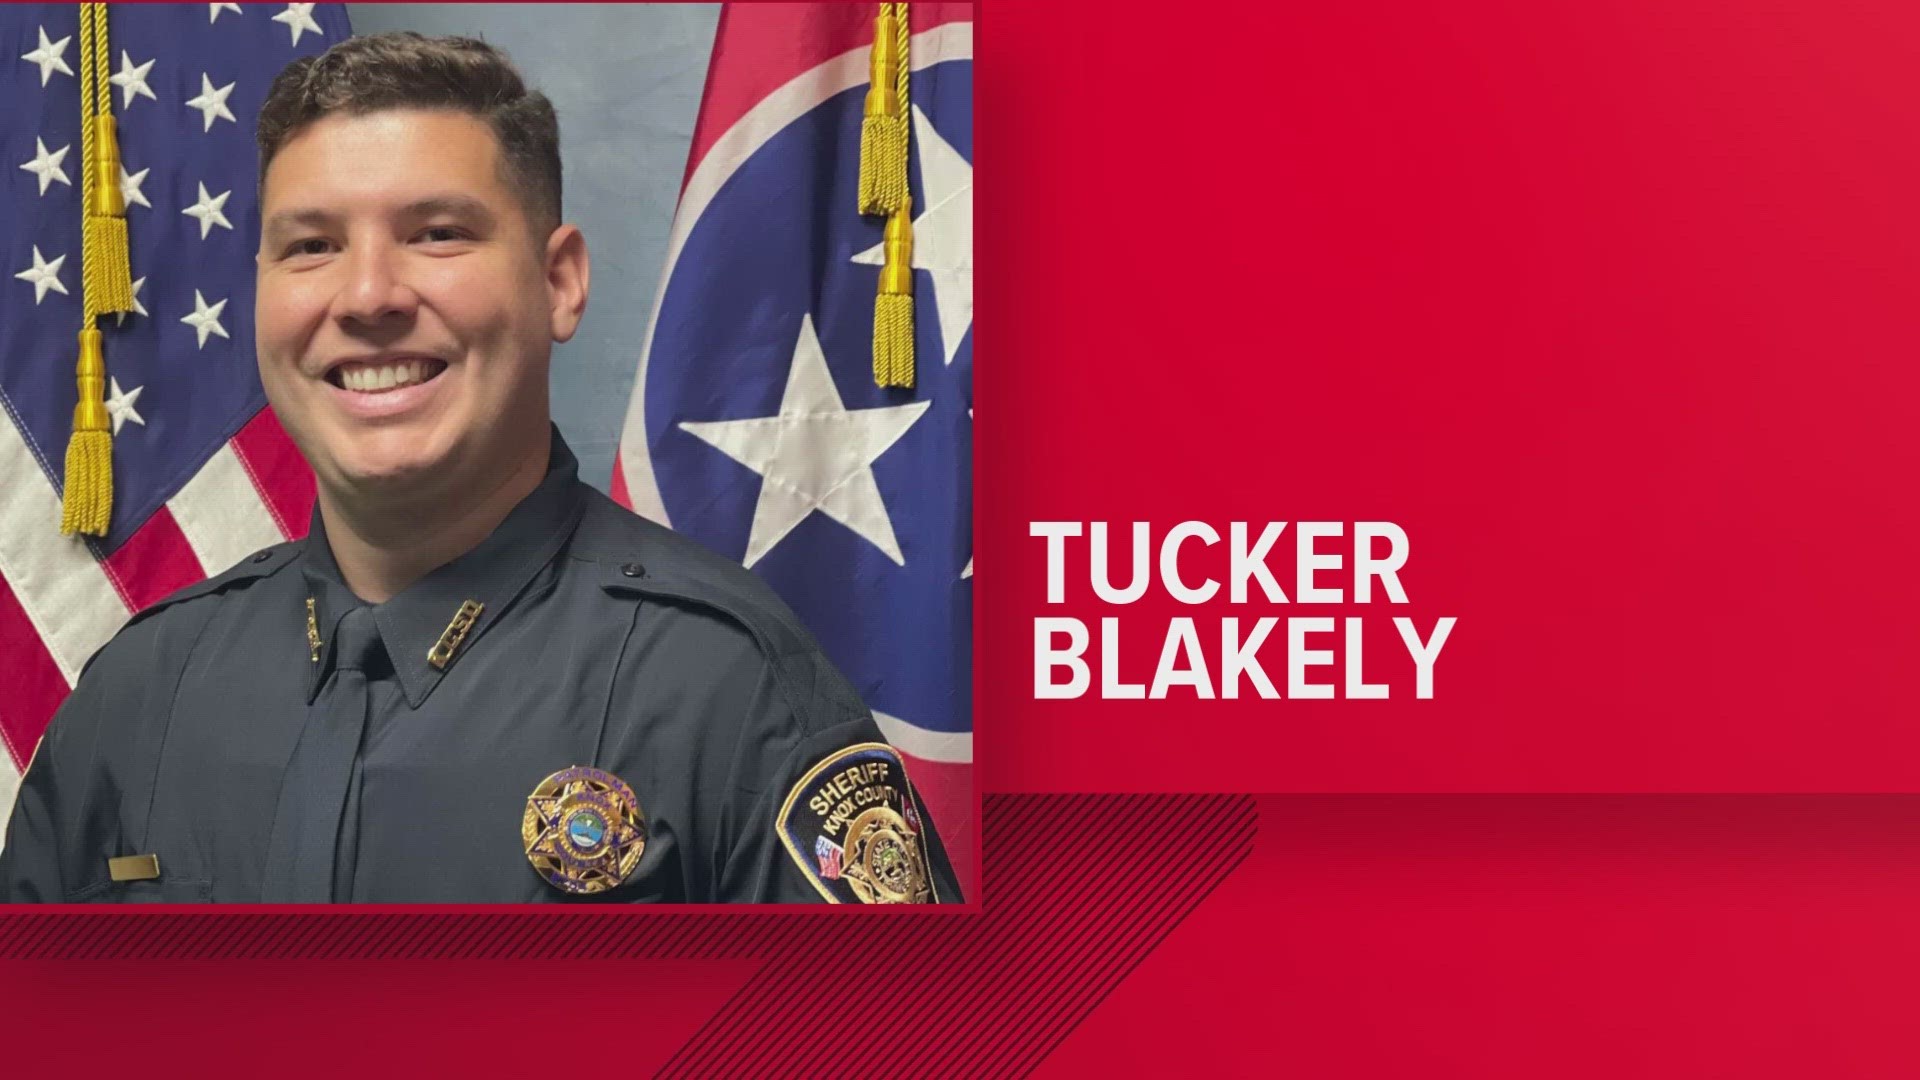 29-year-old Tucker Blakely graduated from the regional academy in 2021. He was admired at KCSO for his passion for working in law enforcement.